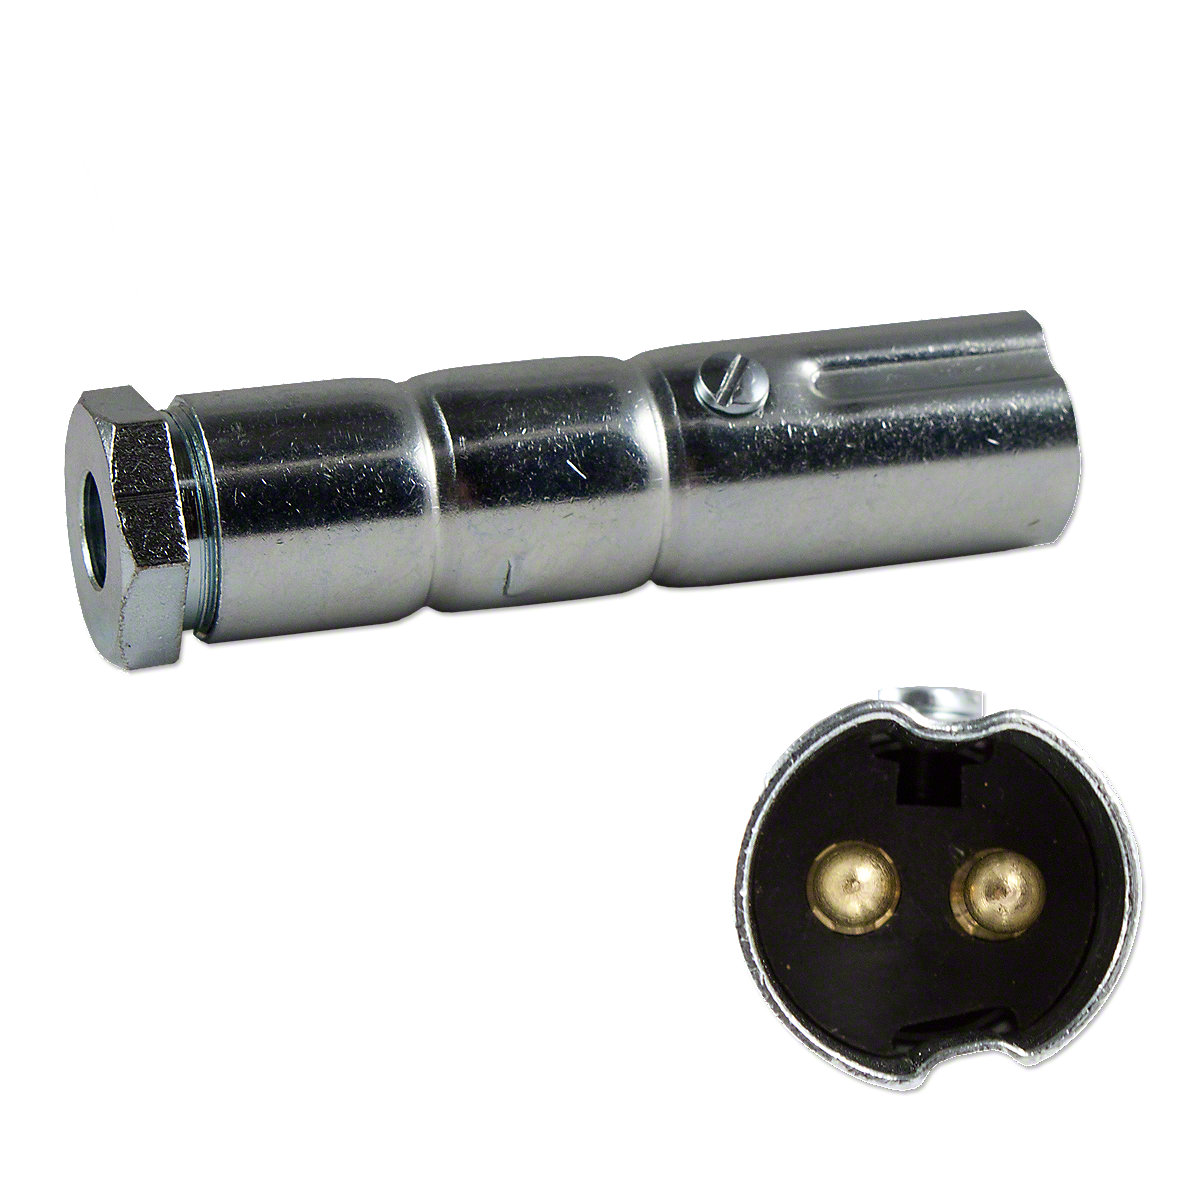 Auxiliary Male 2 Pin Connector Plug For Massey Harris And Massey Ferguson Tractors.